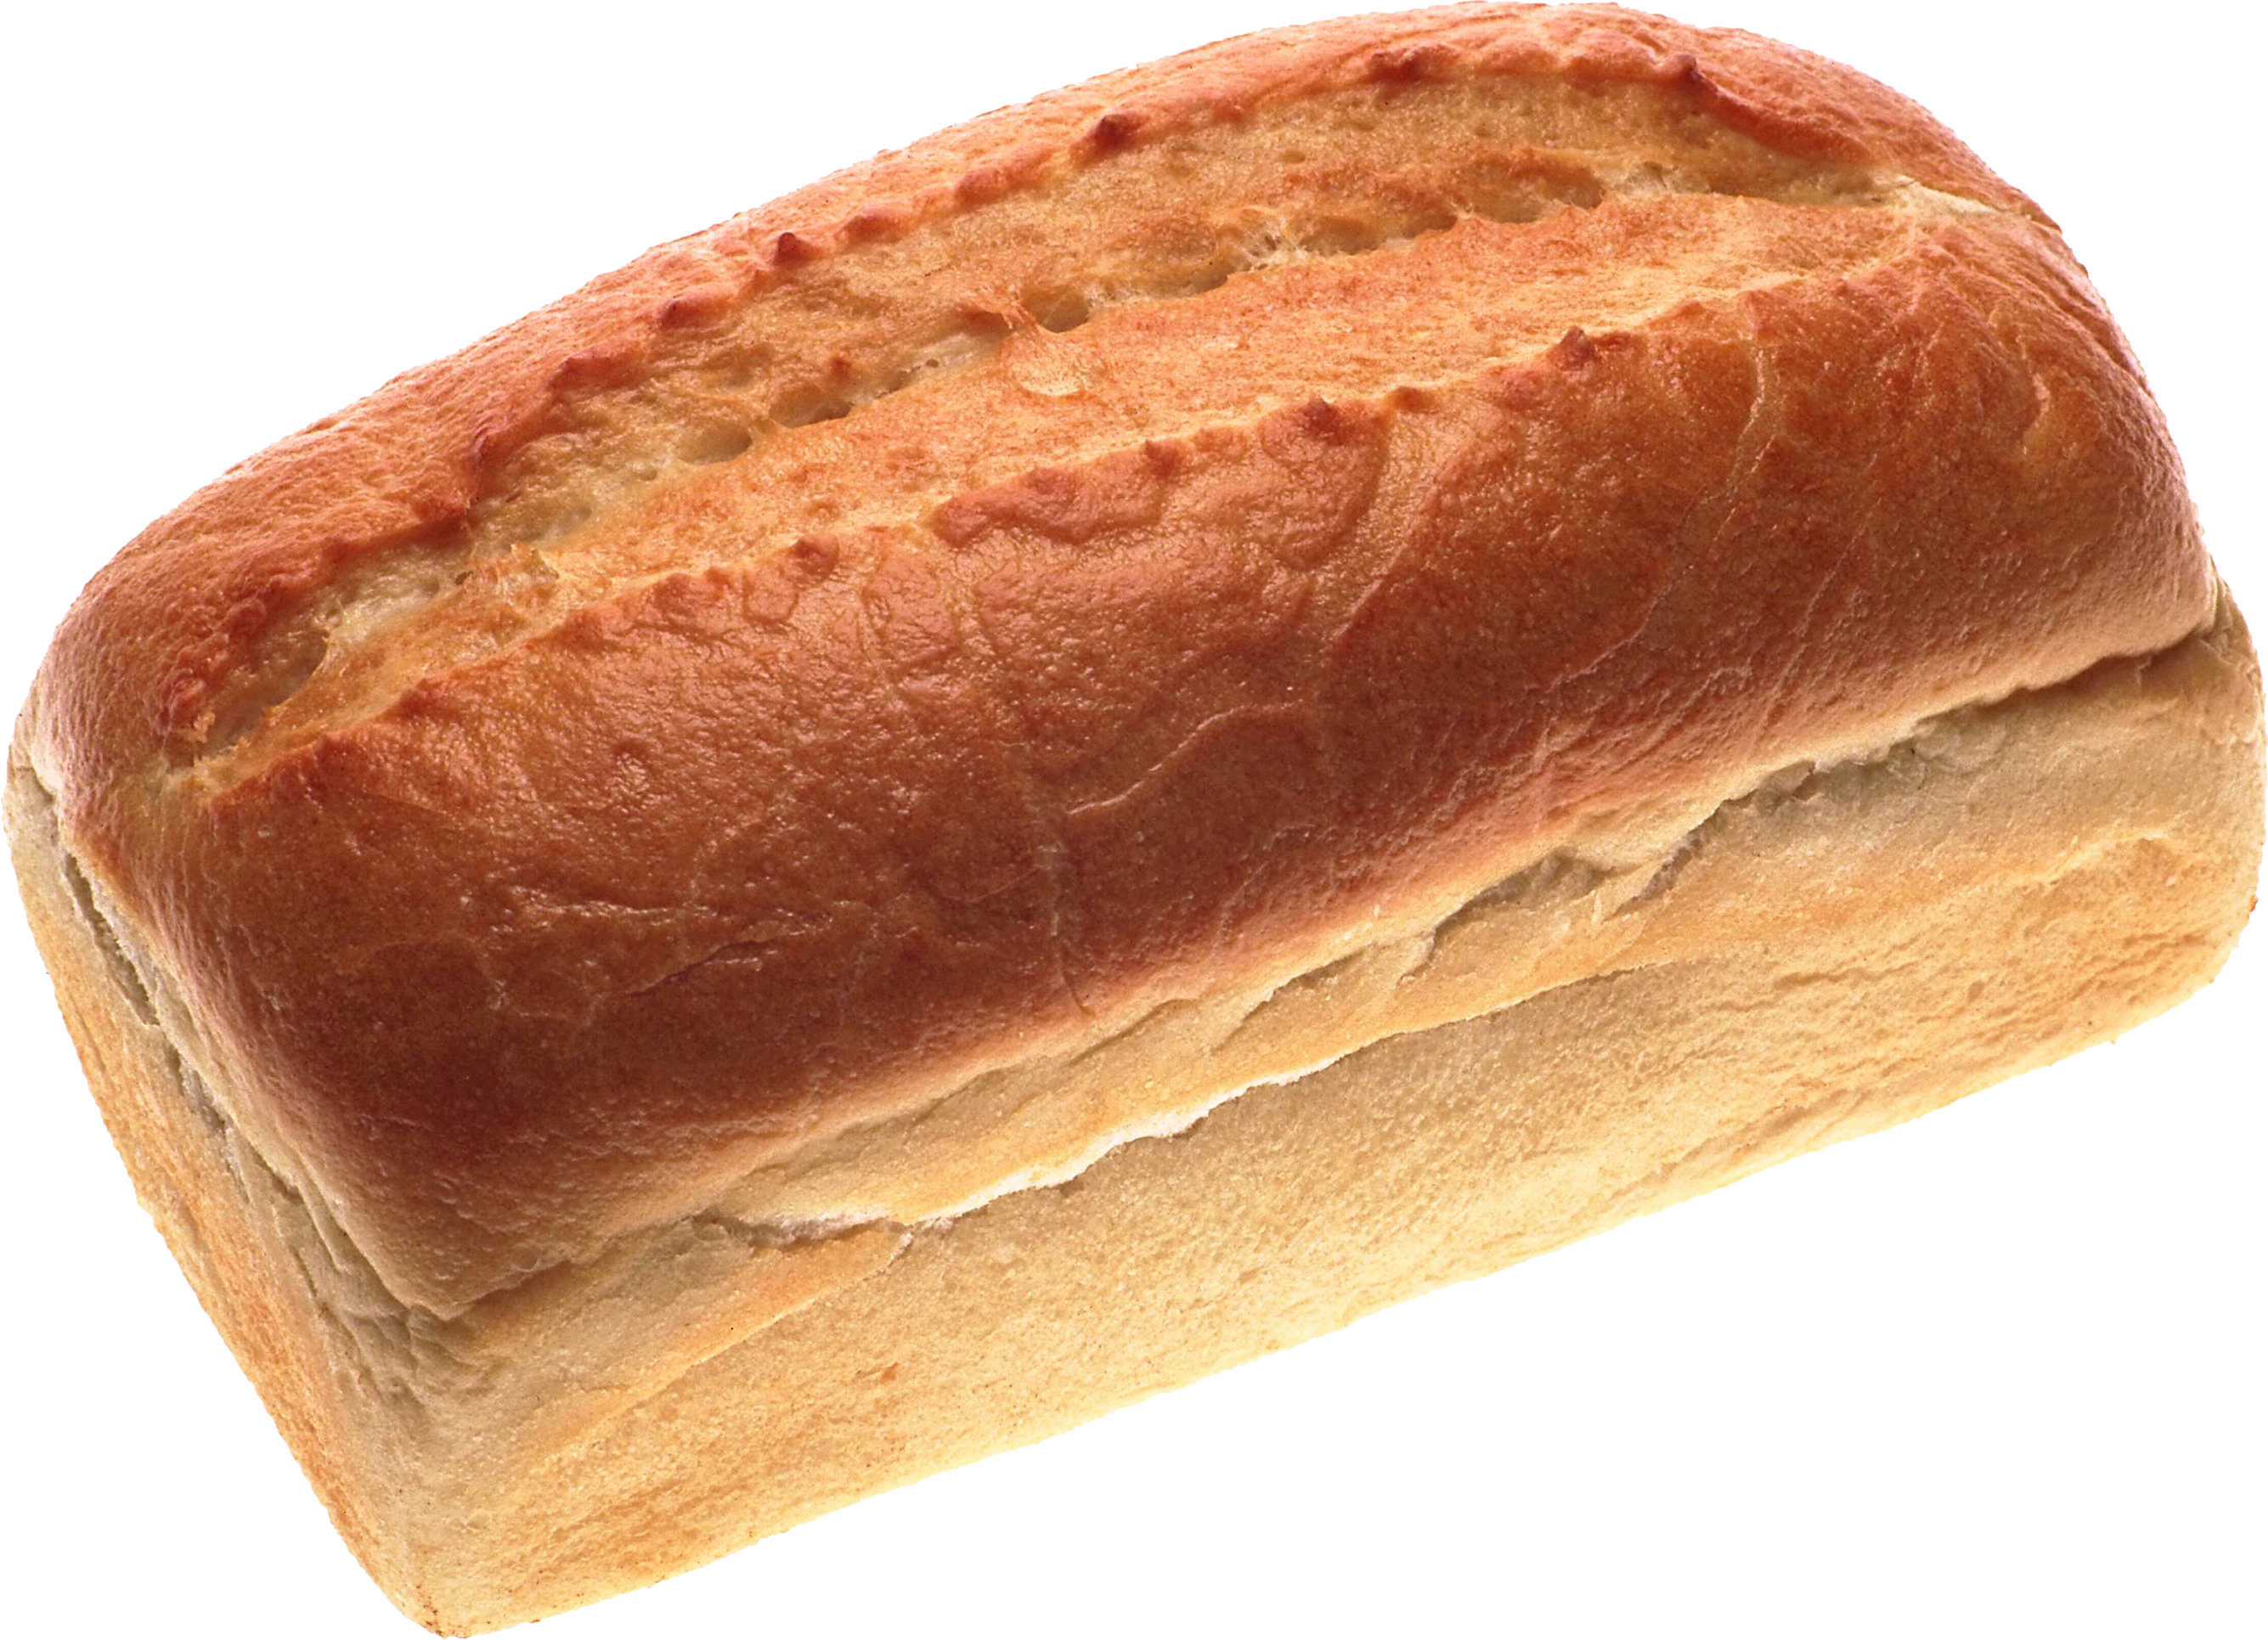 Bread Png Image   Bread Png - Bread, Transparent background PNG HD thumbnail